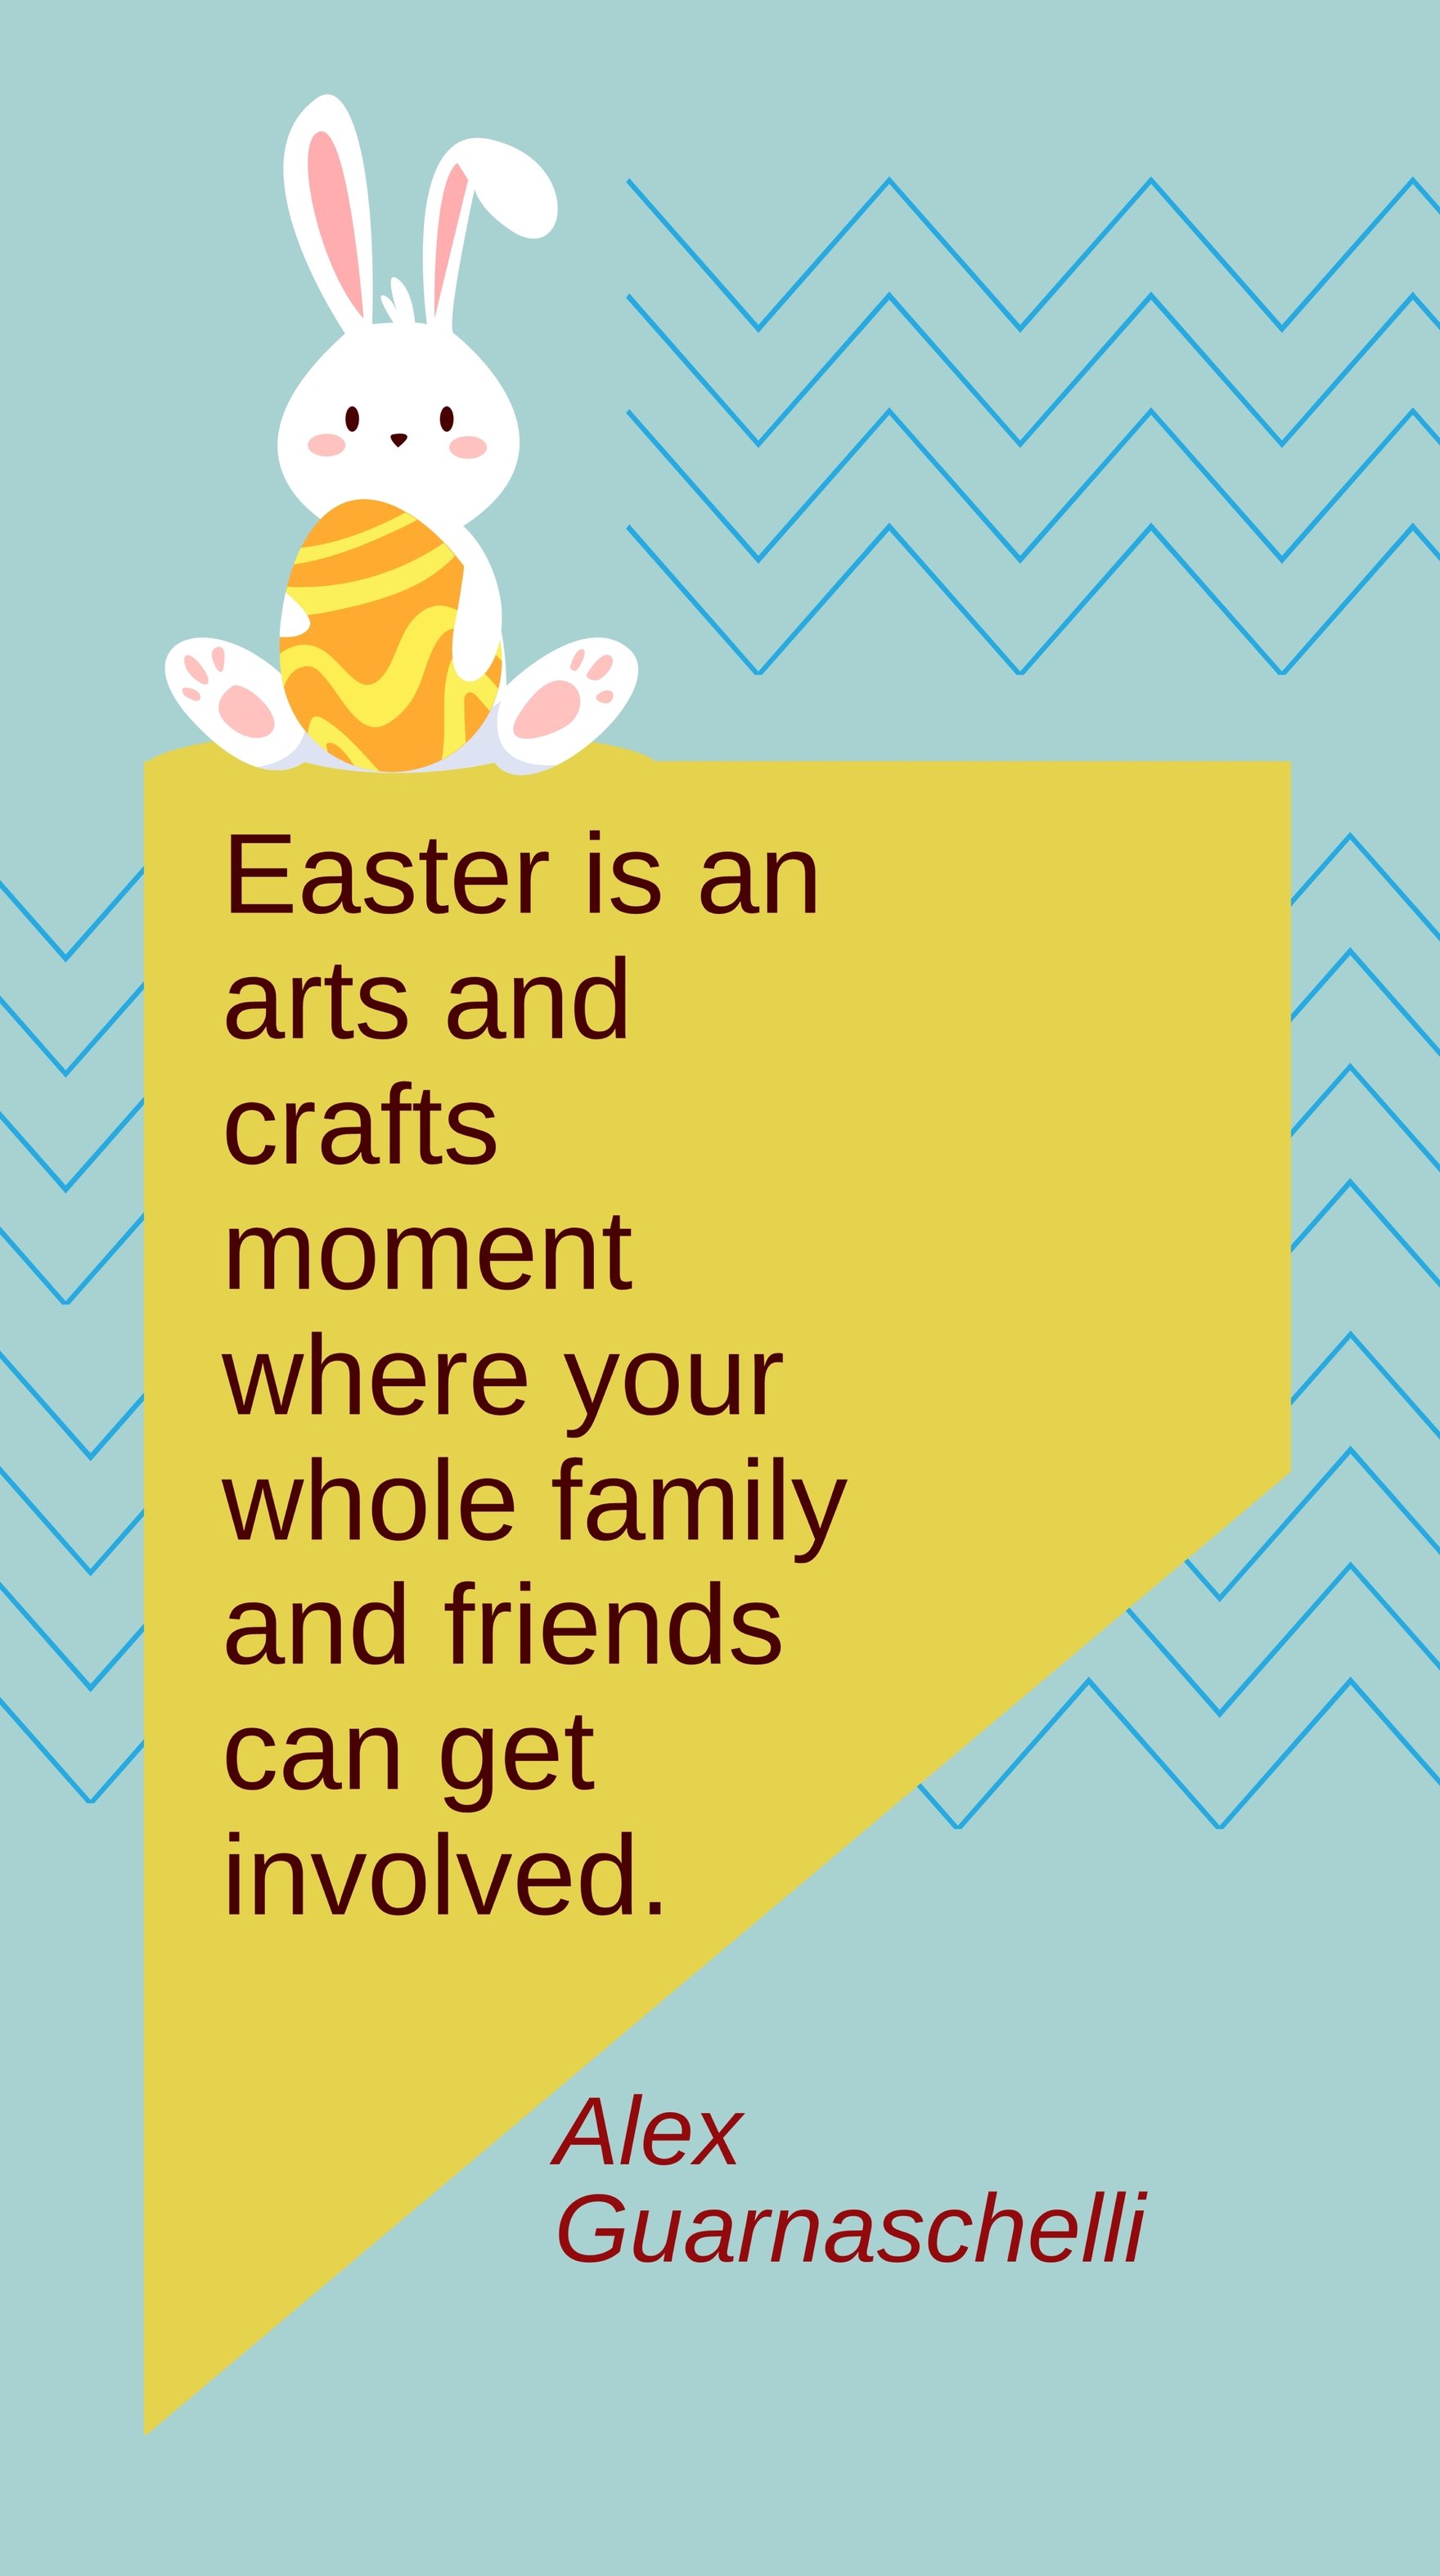 Free Alex Guarnaschelli - Easter is an arts and crafts moment where your whole family and friends can get involved.